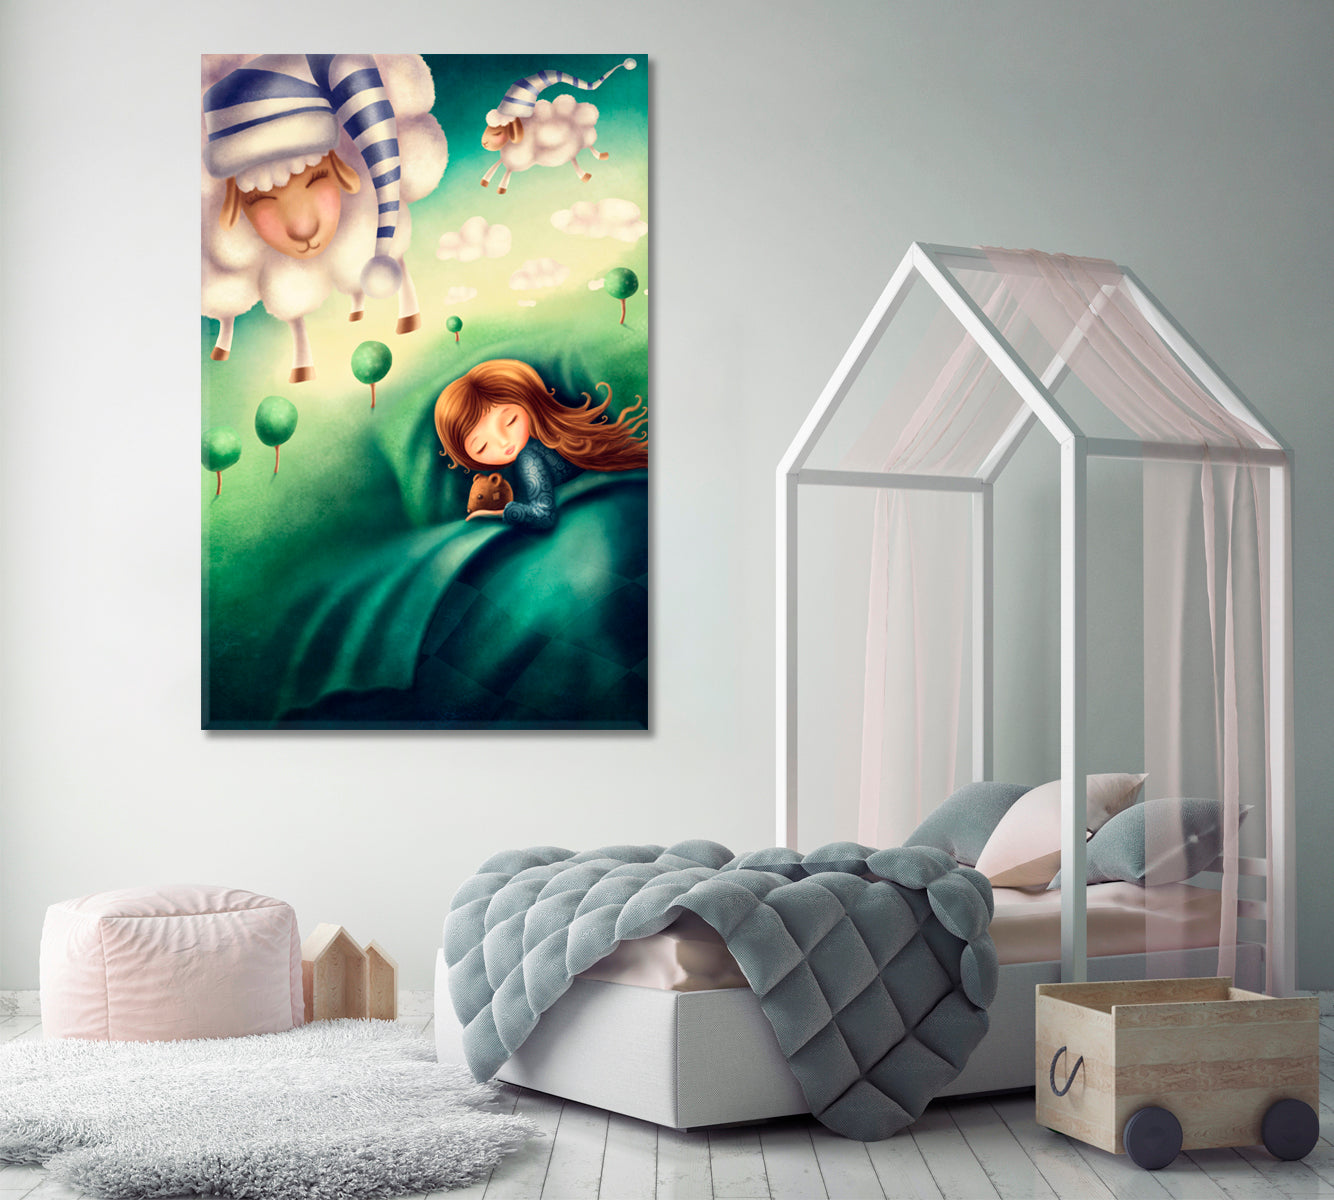 Sleeping Princess with Sheep Canvas Print ArtLexy 1 Panel 16"x24" inches 